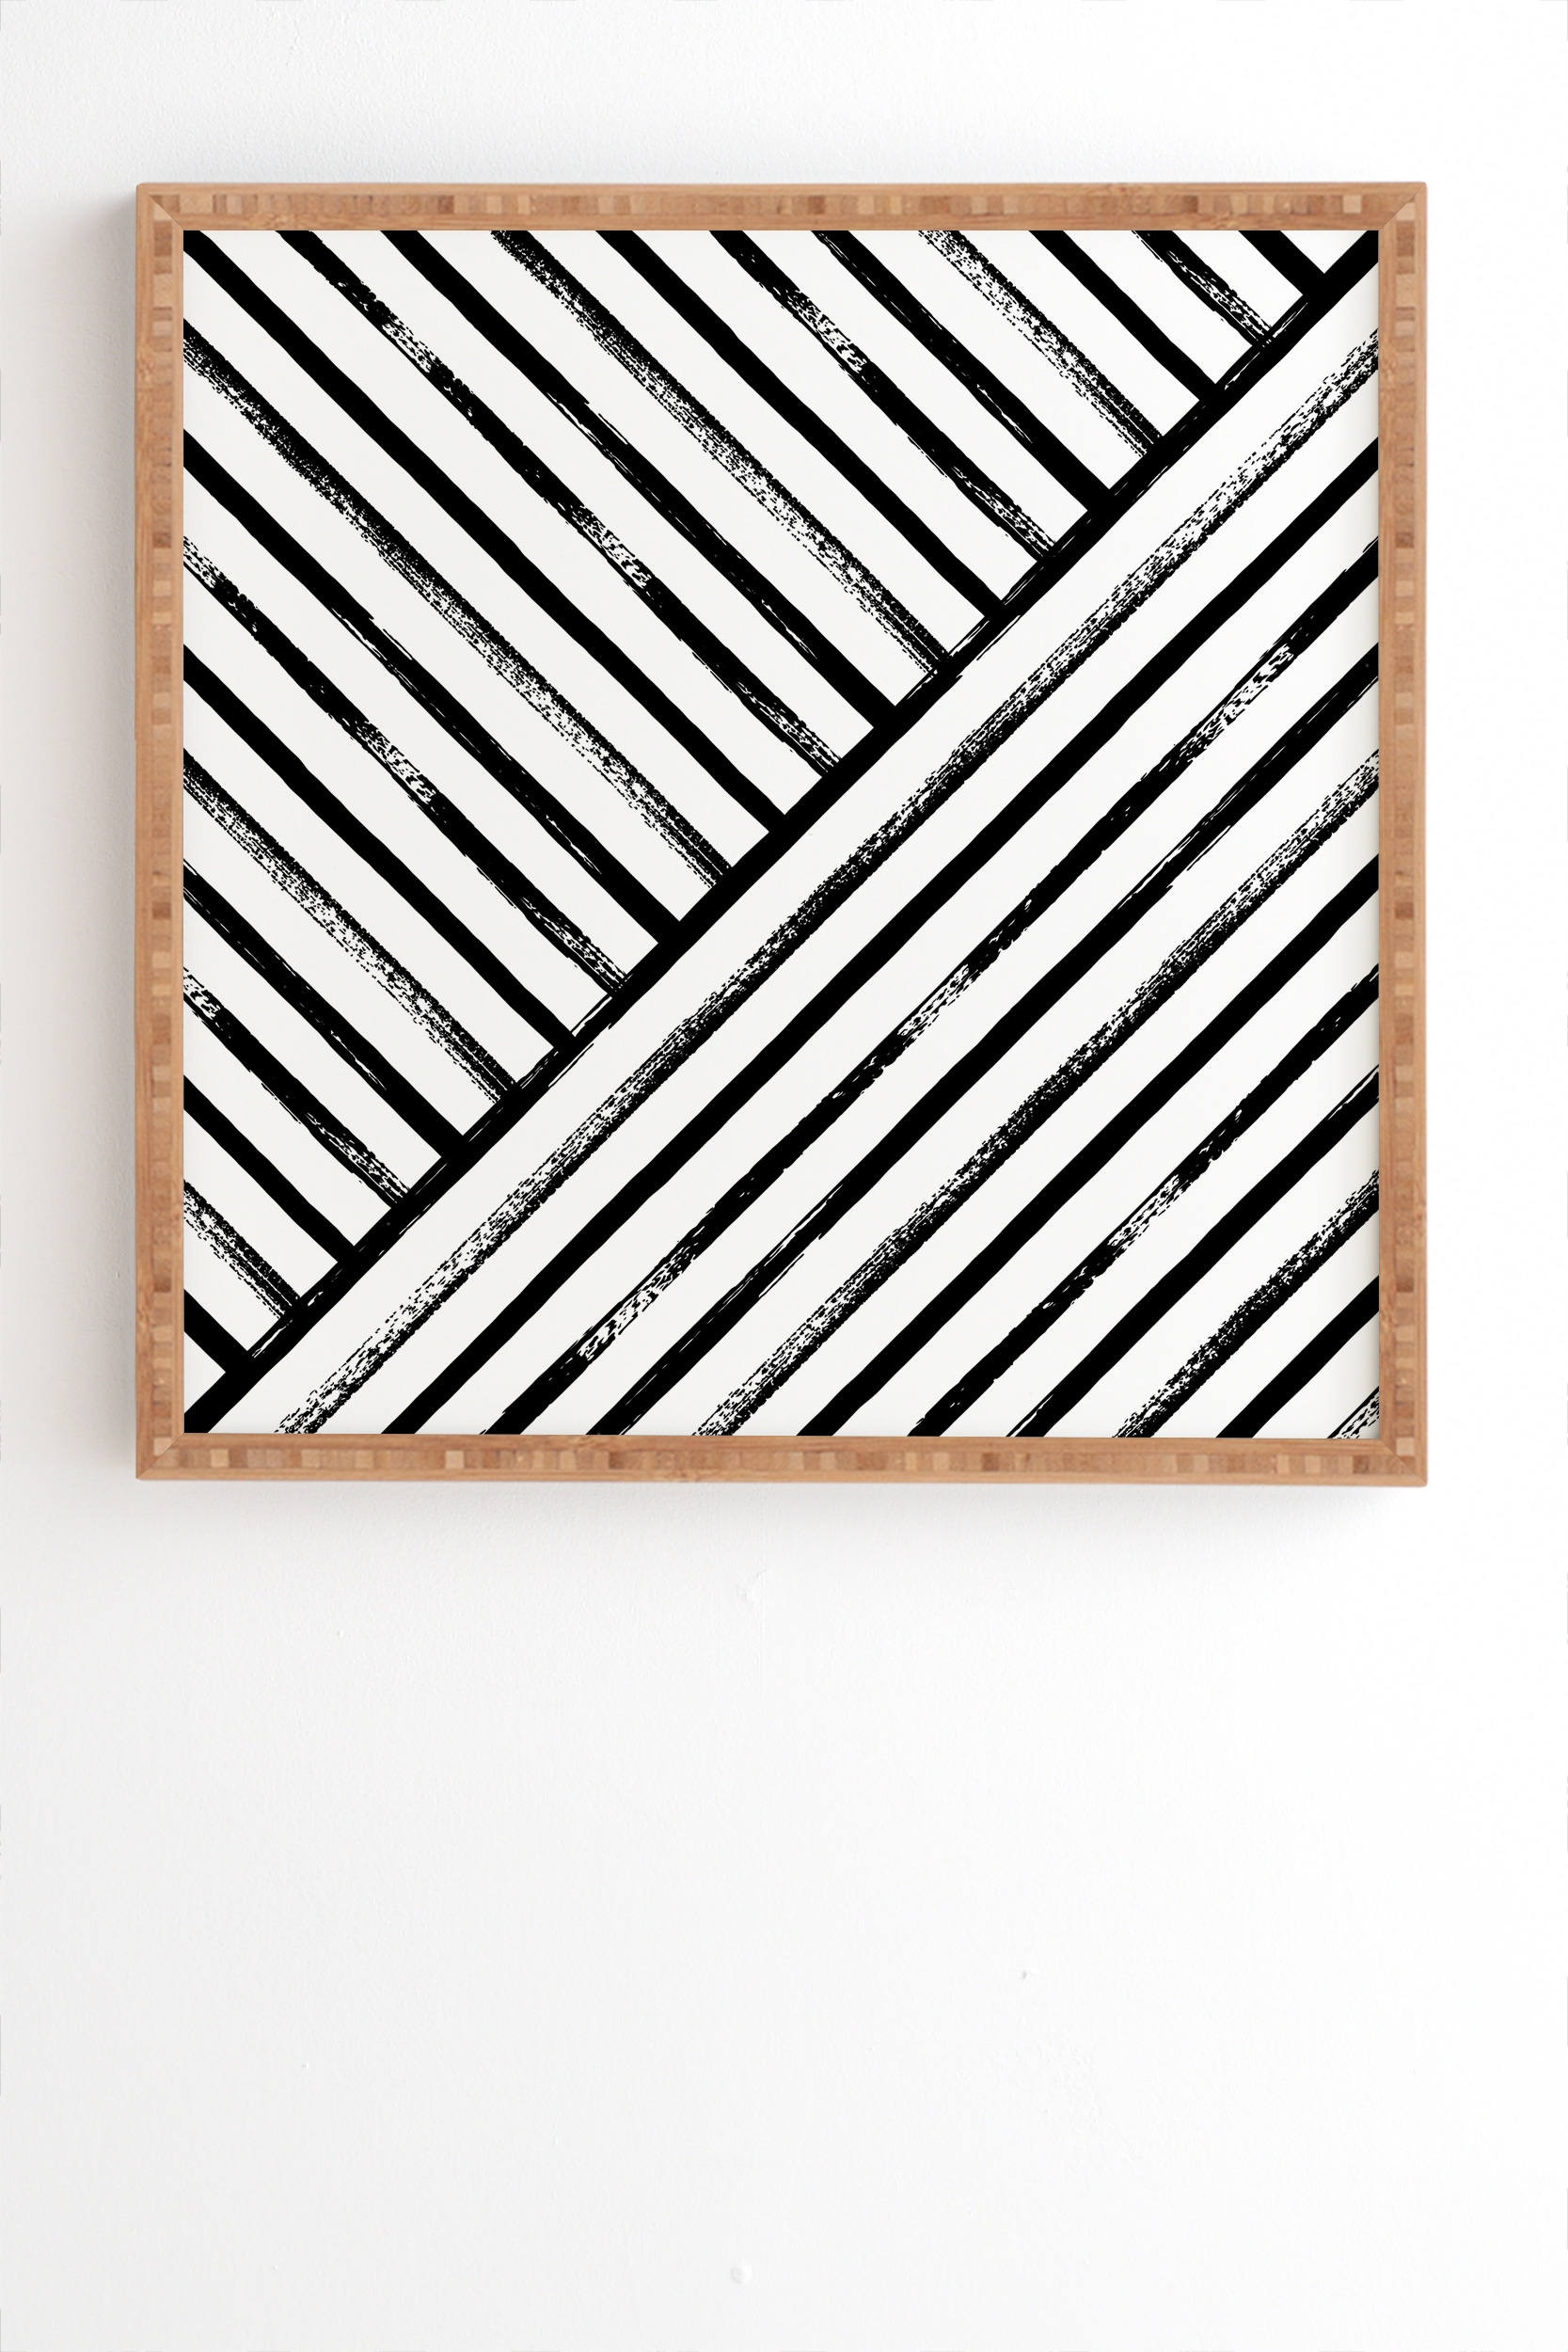 Geometric Stripe Pattern by Kelly Haines - Framed Wall Art Bamboo 19" x 22.4" - Image 1